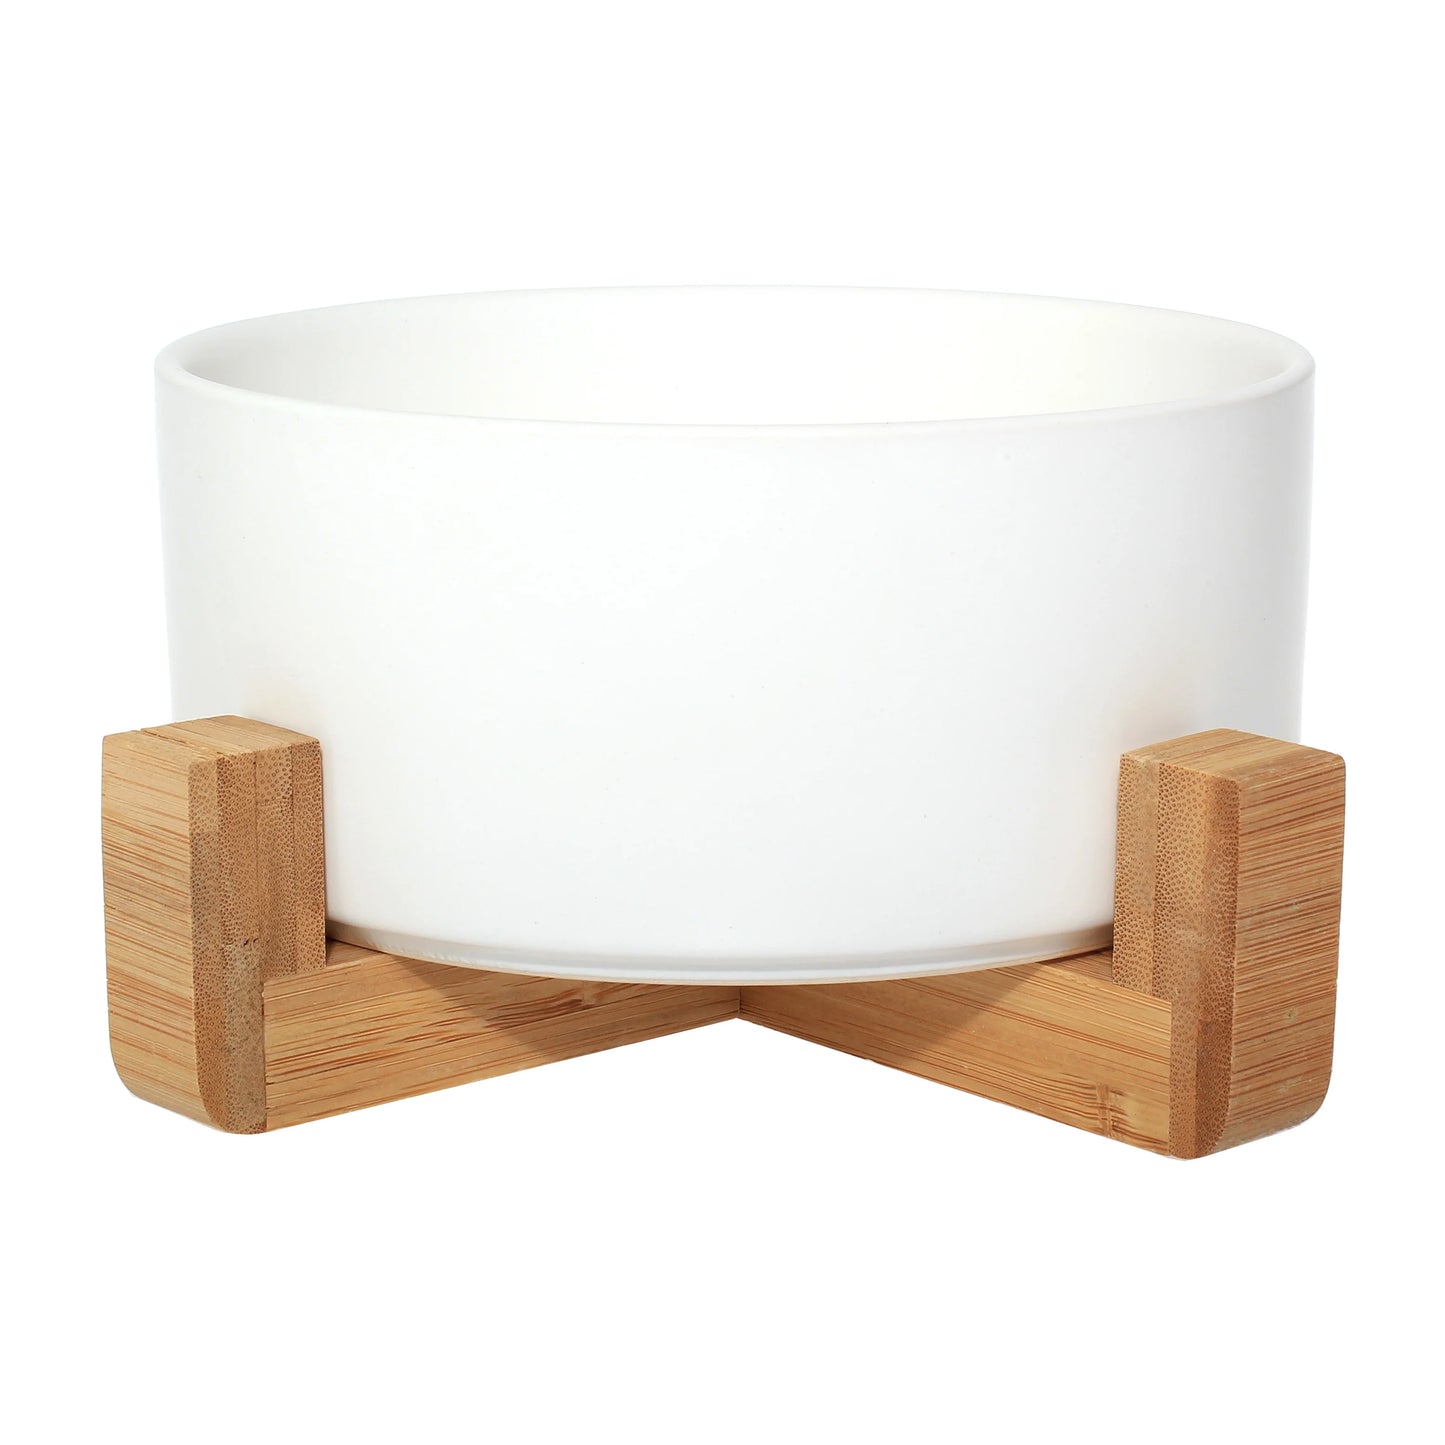 Pet Wiz Ceramic Bowl With Bamboo Stand - White